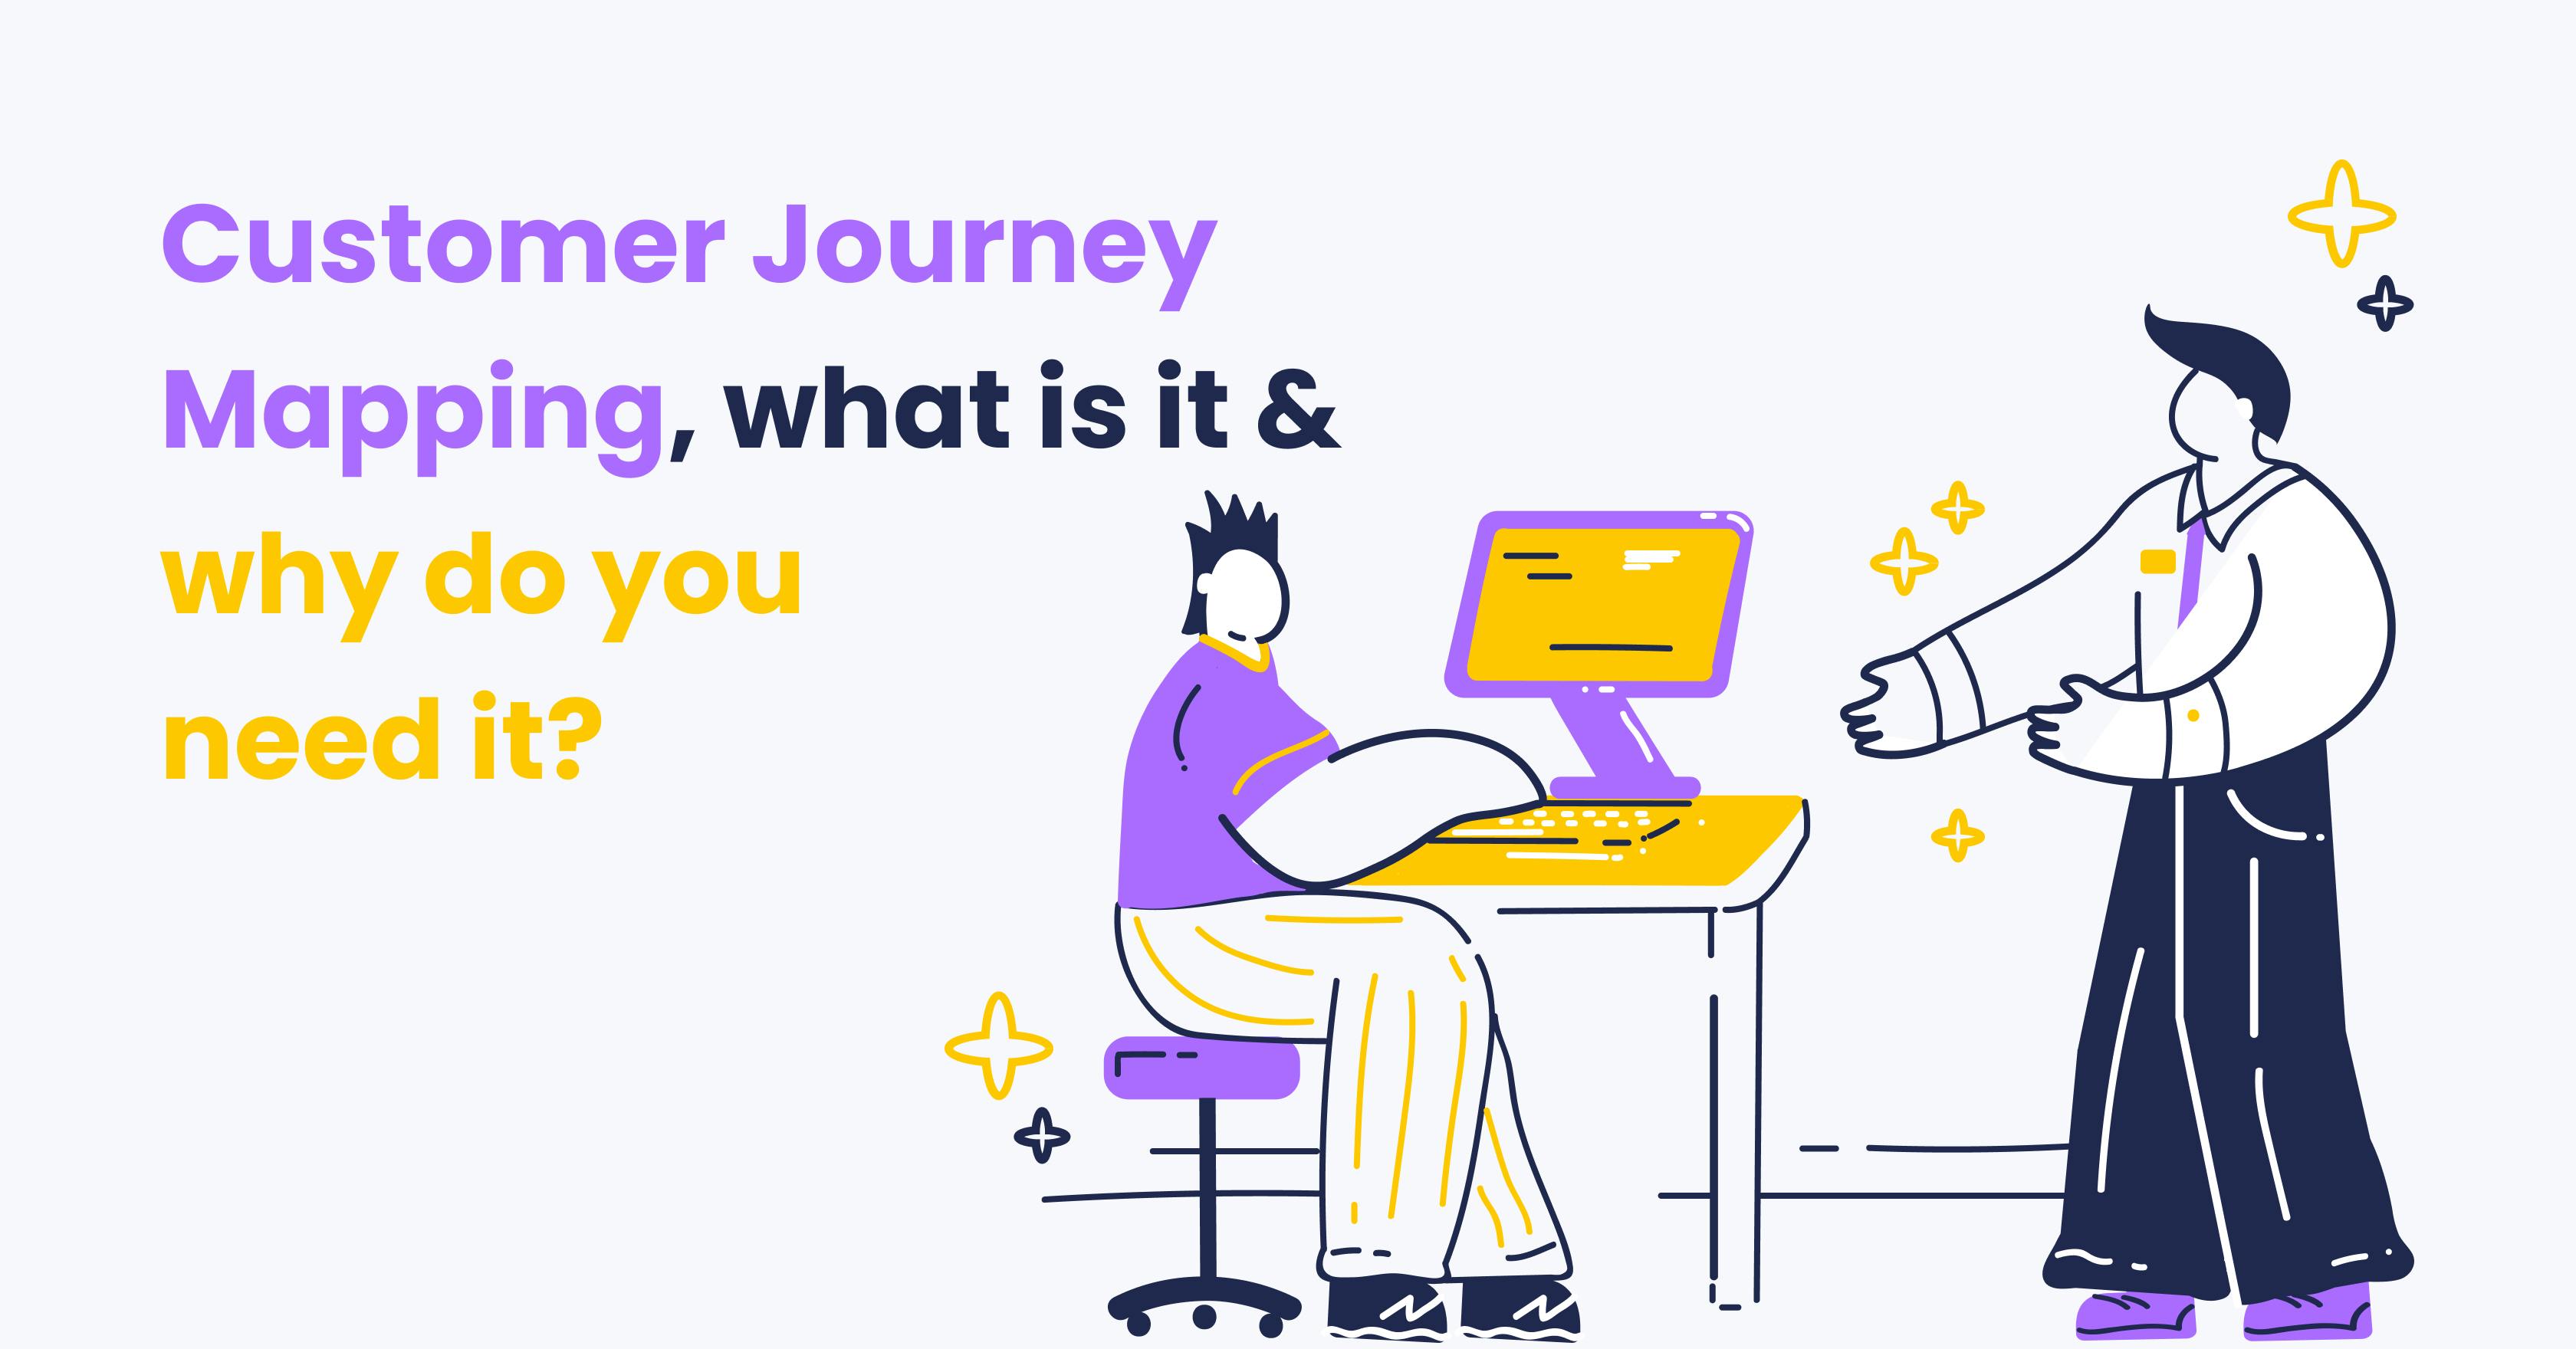 Nightborn - Customer Journey mapping, what is it & why do you need it?